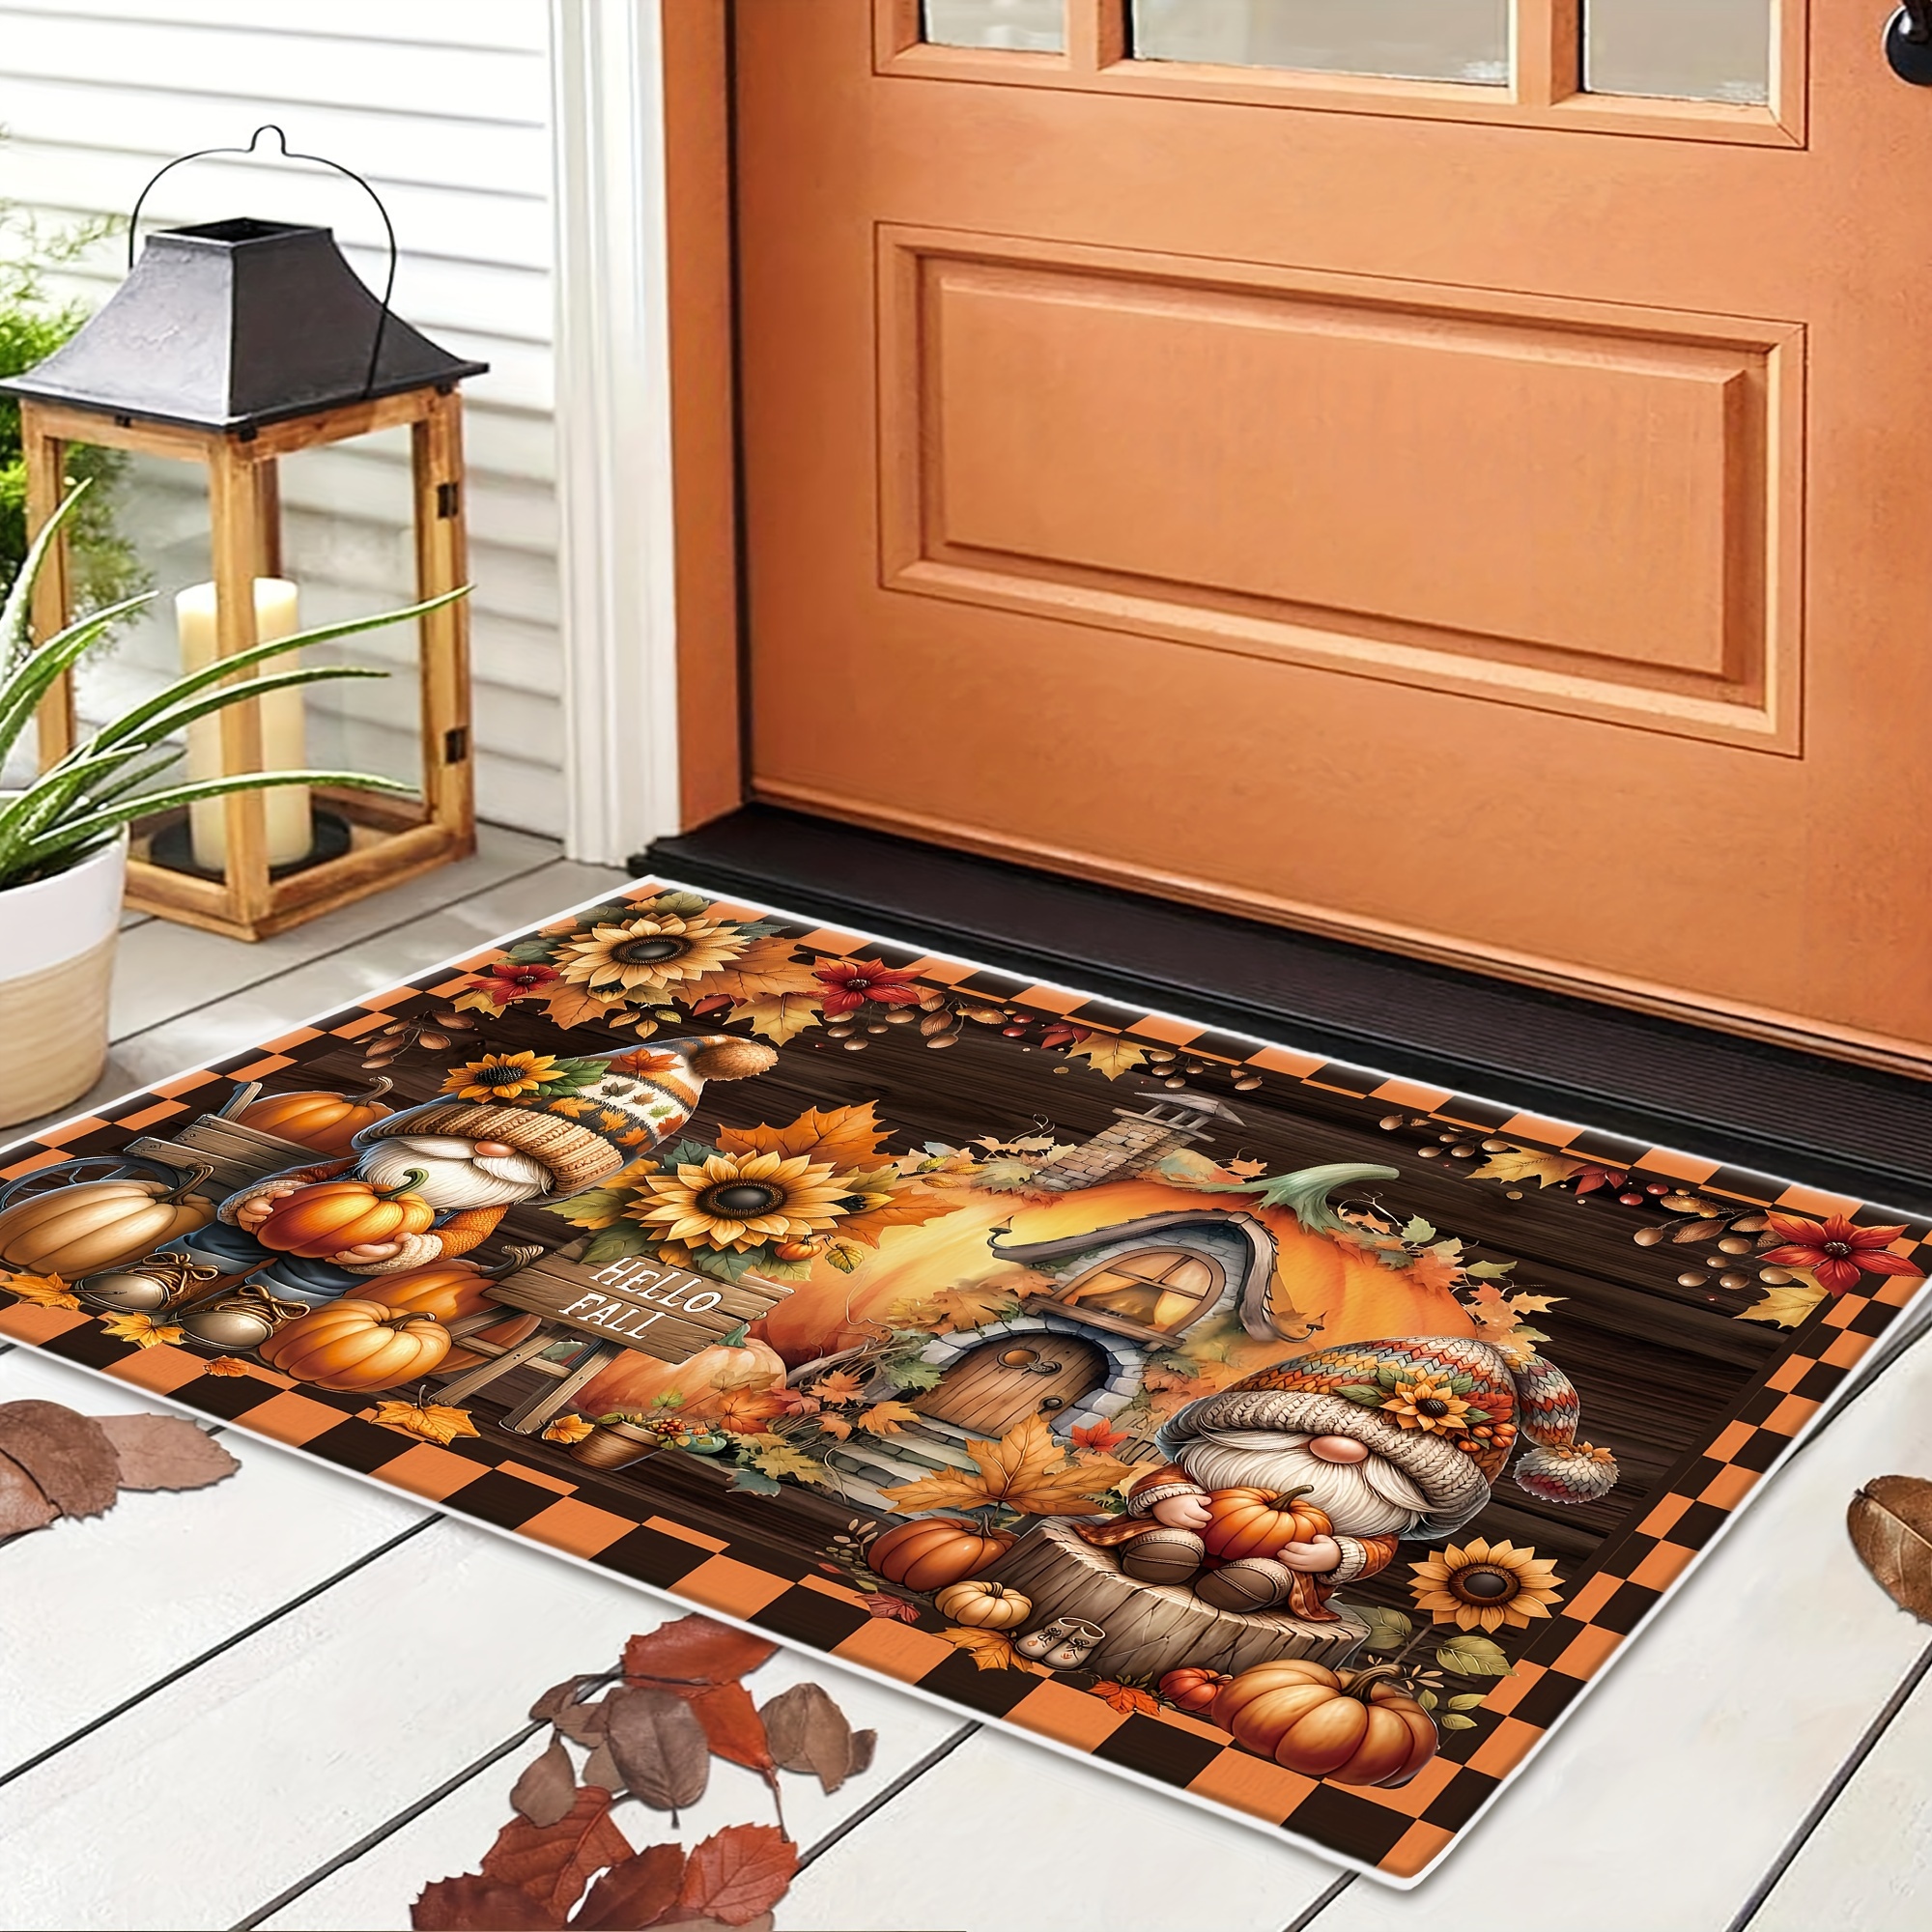 

Charming Farmhouse Gnome & Pumpkin Floor Mat - Non-slip, Easy Clean Crystal Velvet Rug With Maple Leaf & Sunflower Design For Kitchens, Bedrooms, And Living Spaces Greenery Home Decor